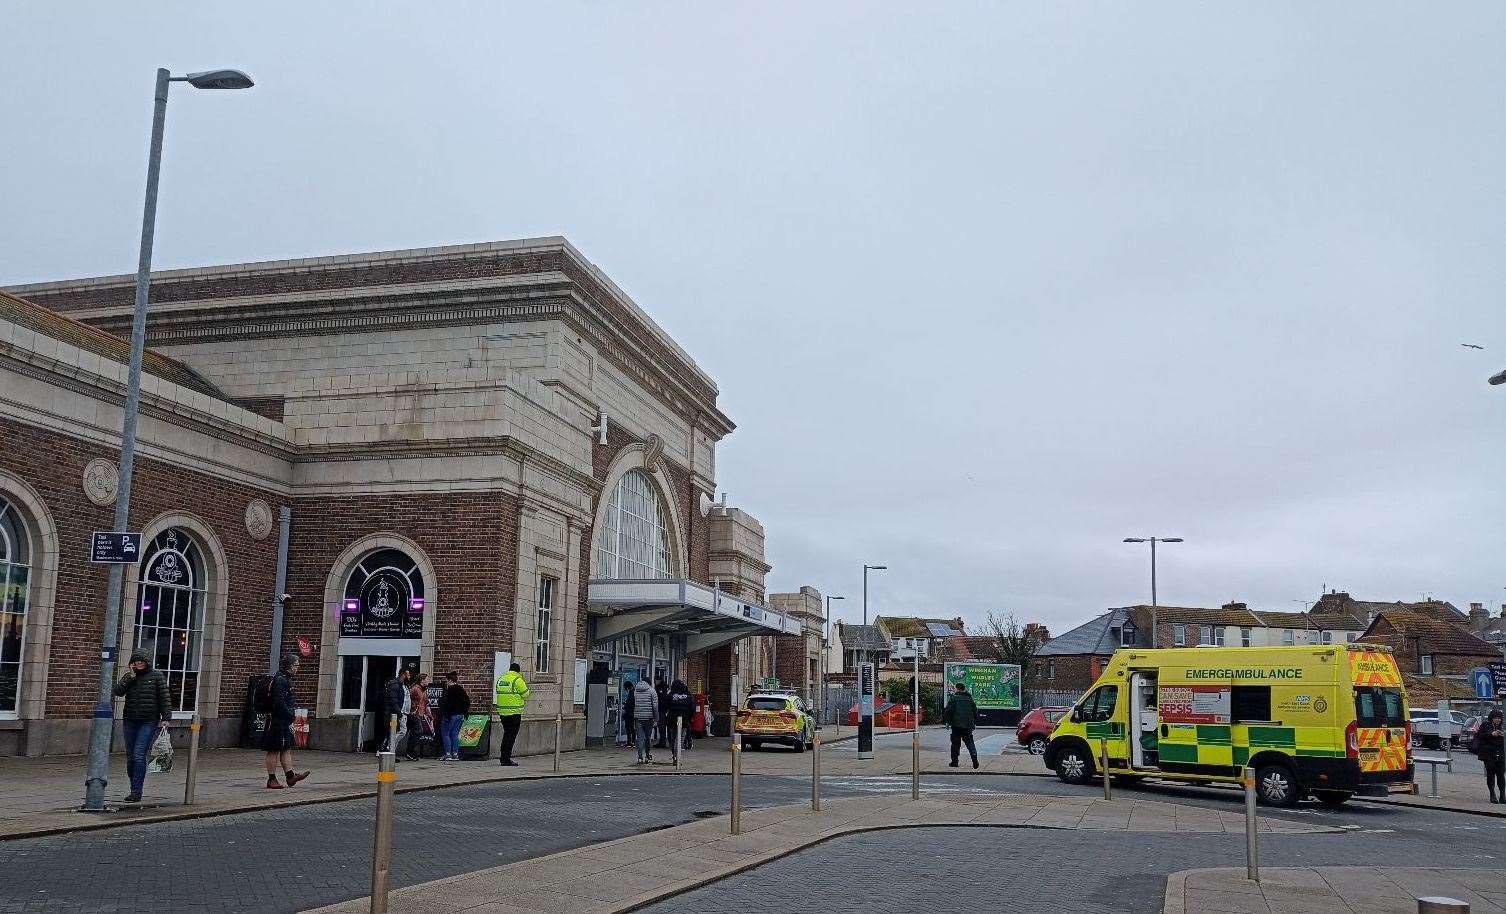 Emergency services were called to attend to a teenage girl outside a railway station in Margate